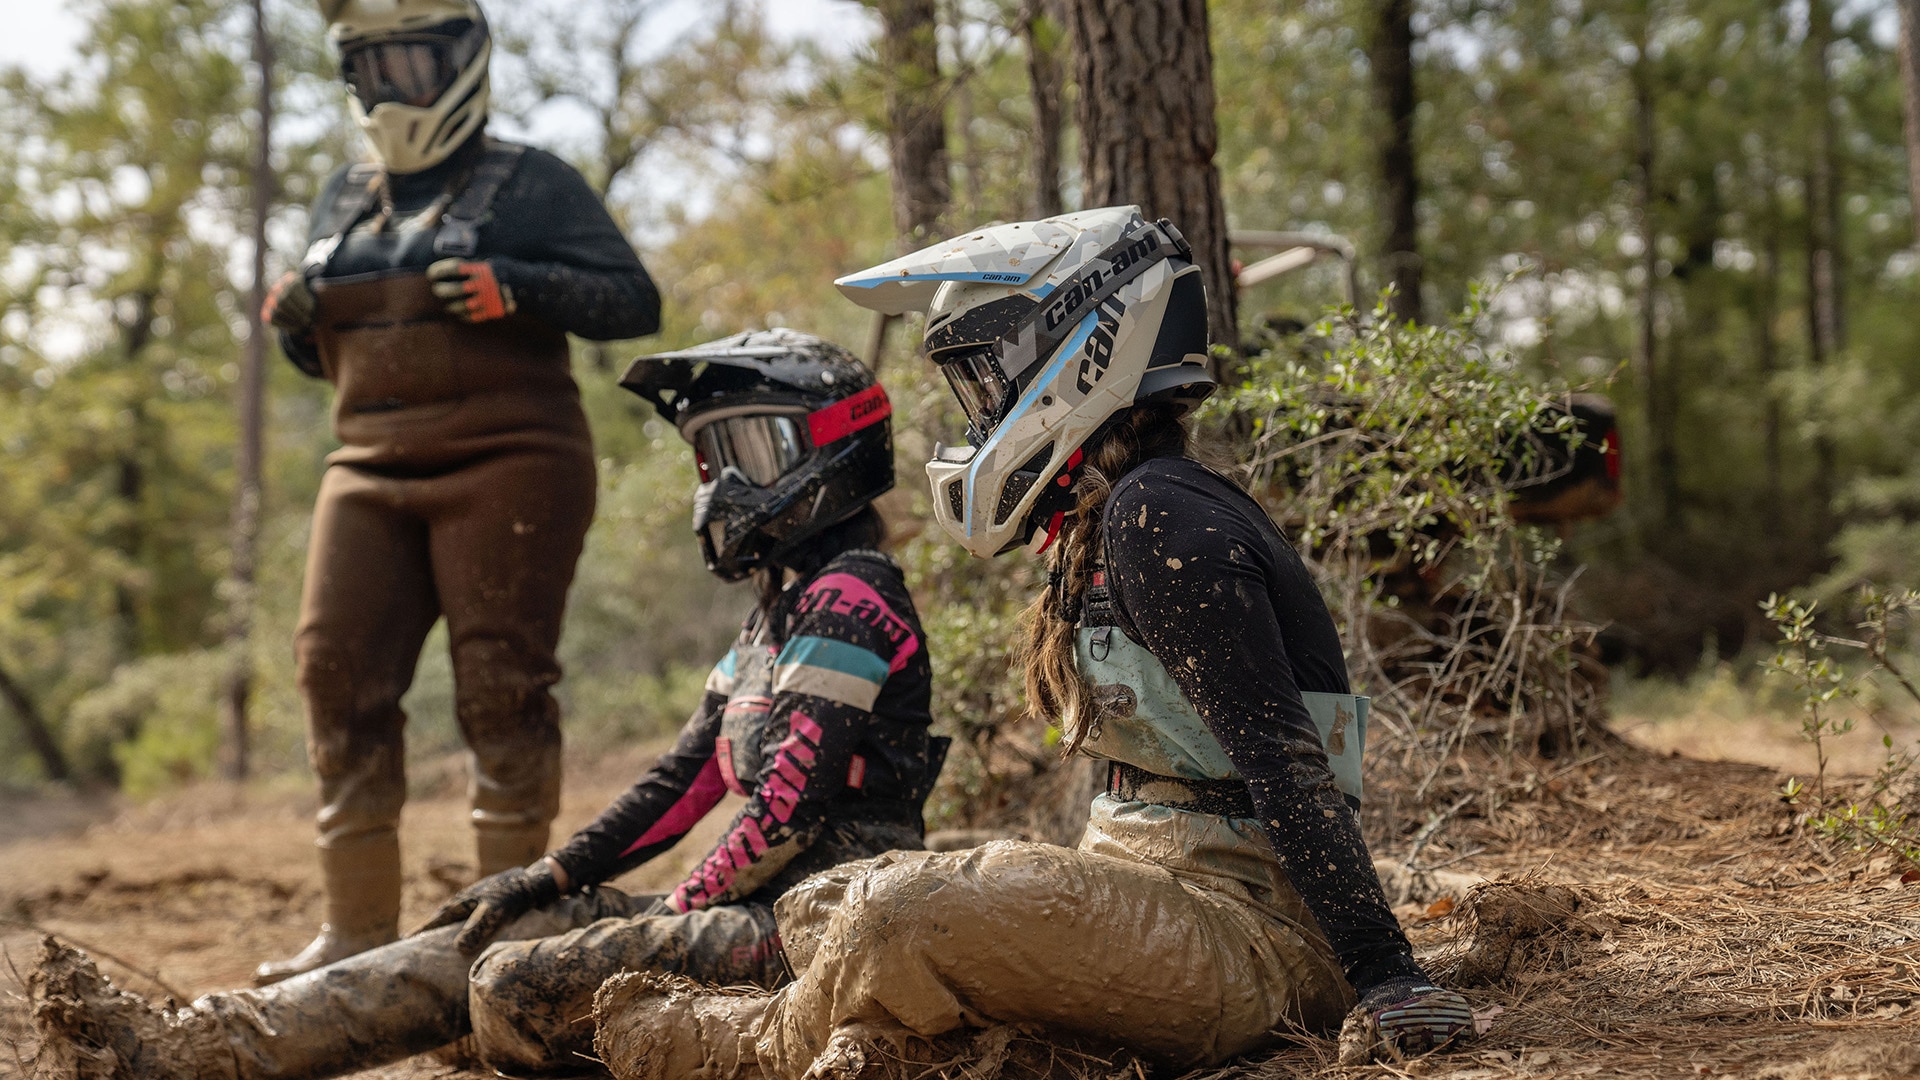 Two female riders wearing Can-Am Off-Road riding gear sitting in the dirt